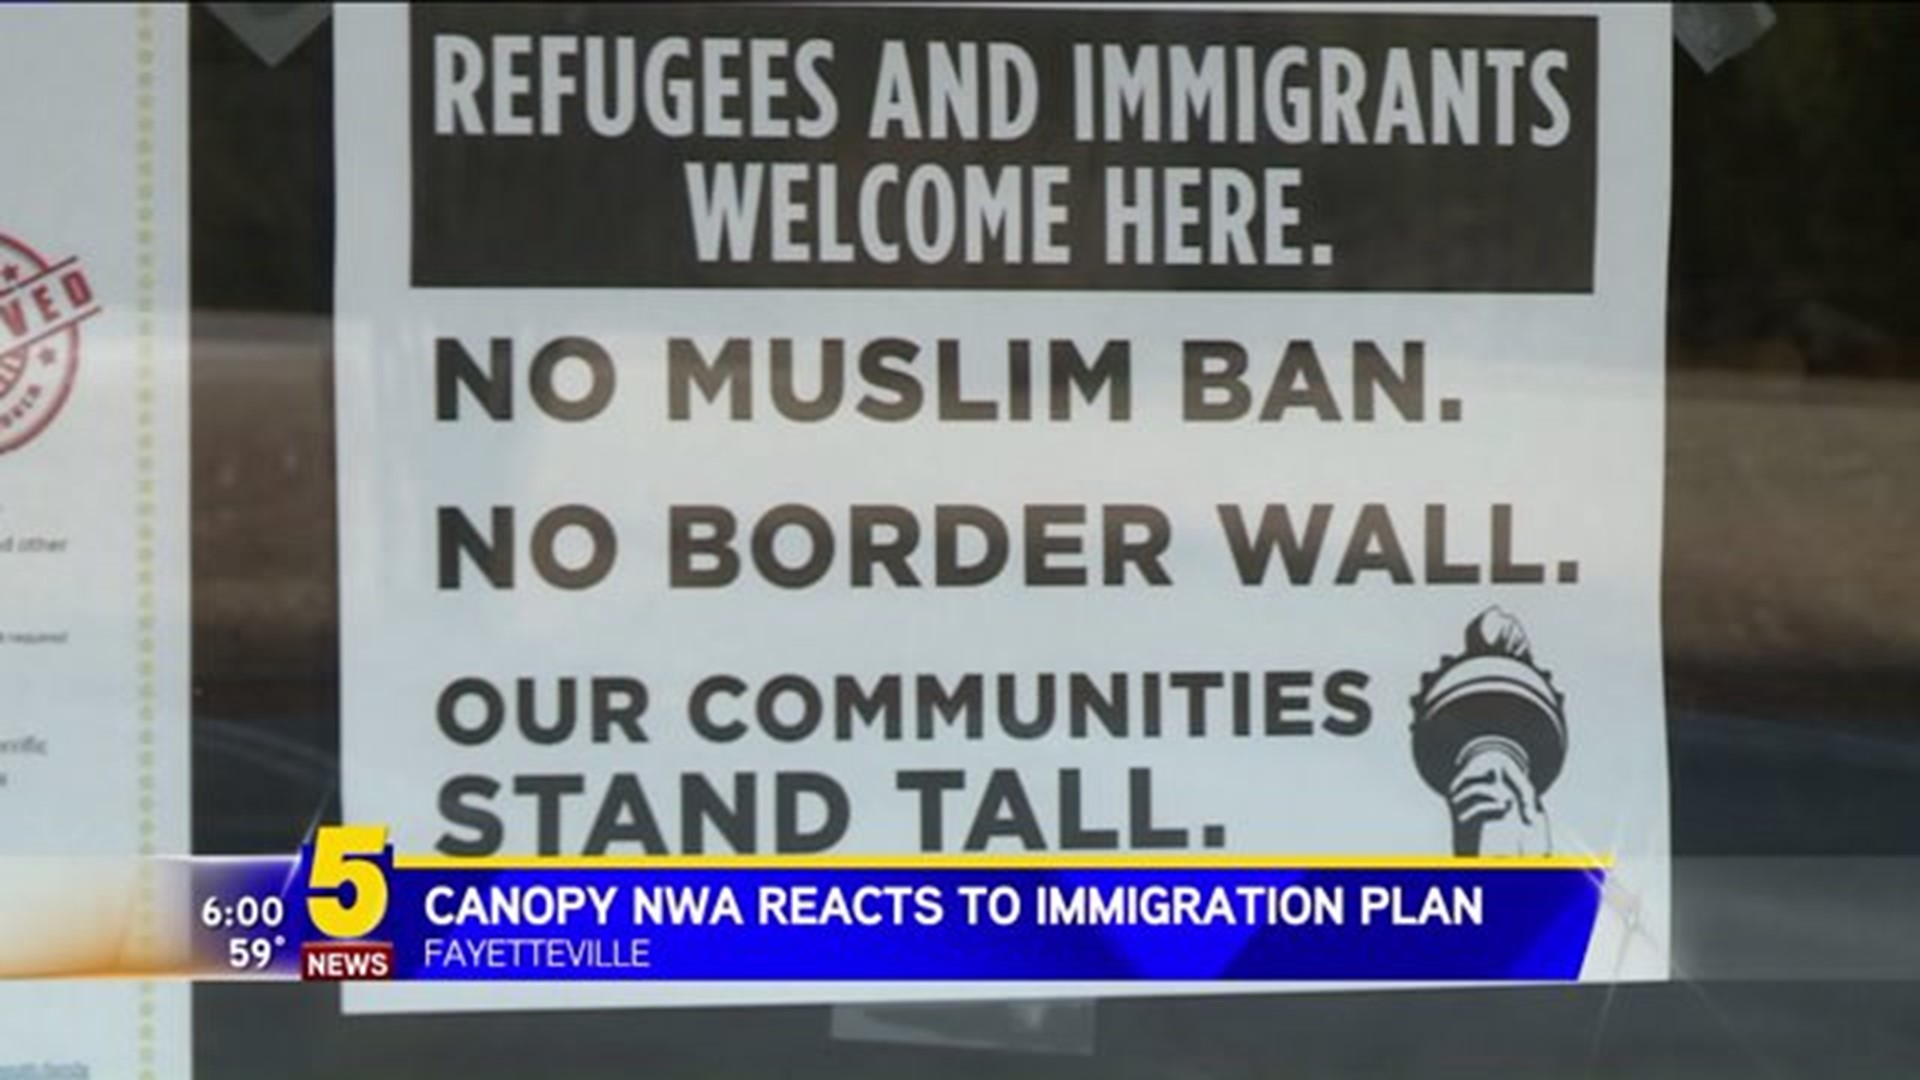 CANOPY NWA REACTS TO EXECUTIVE ORDER